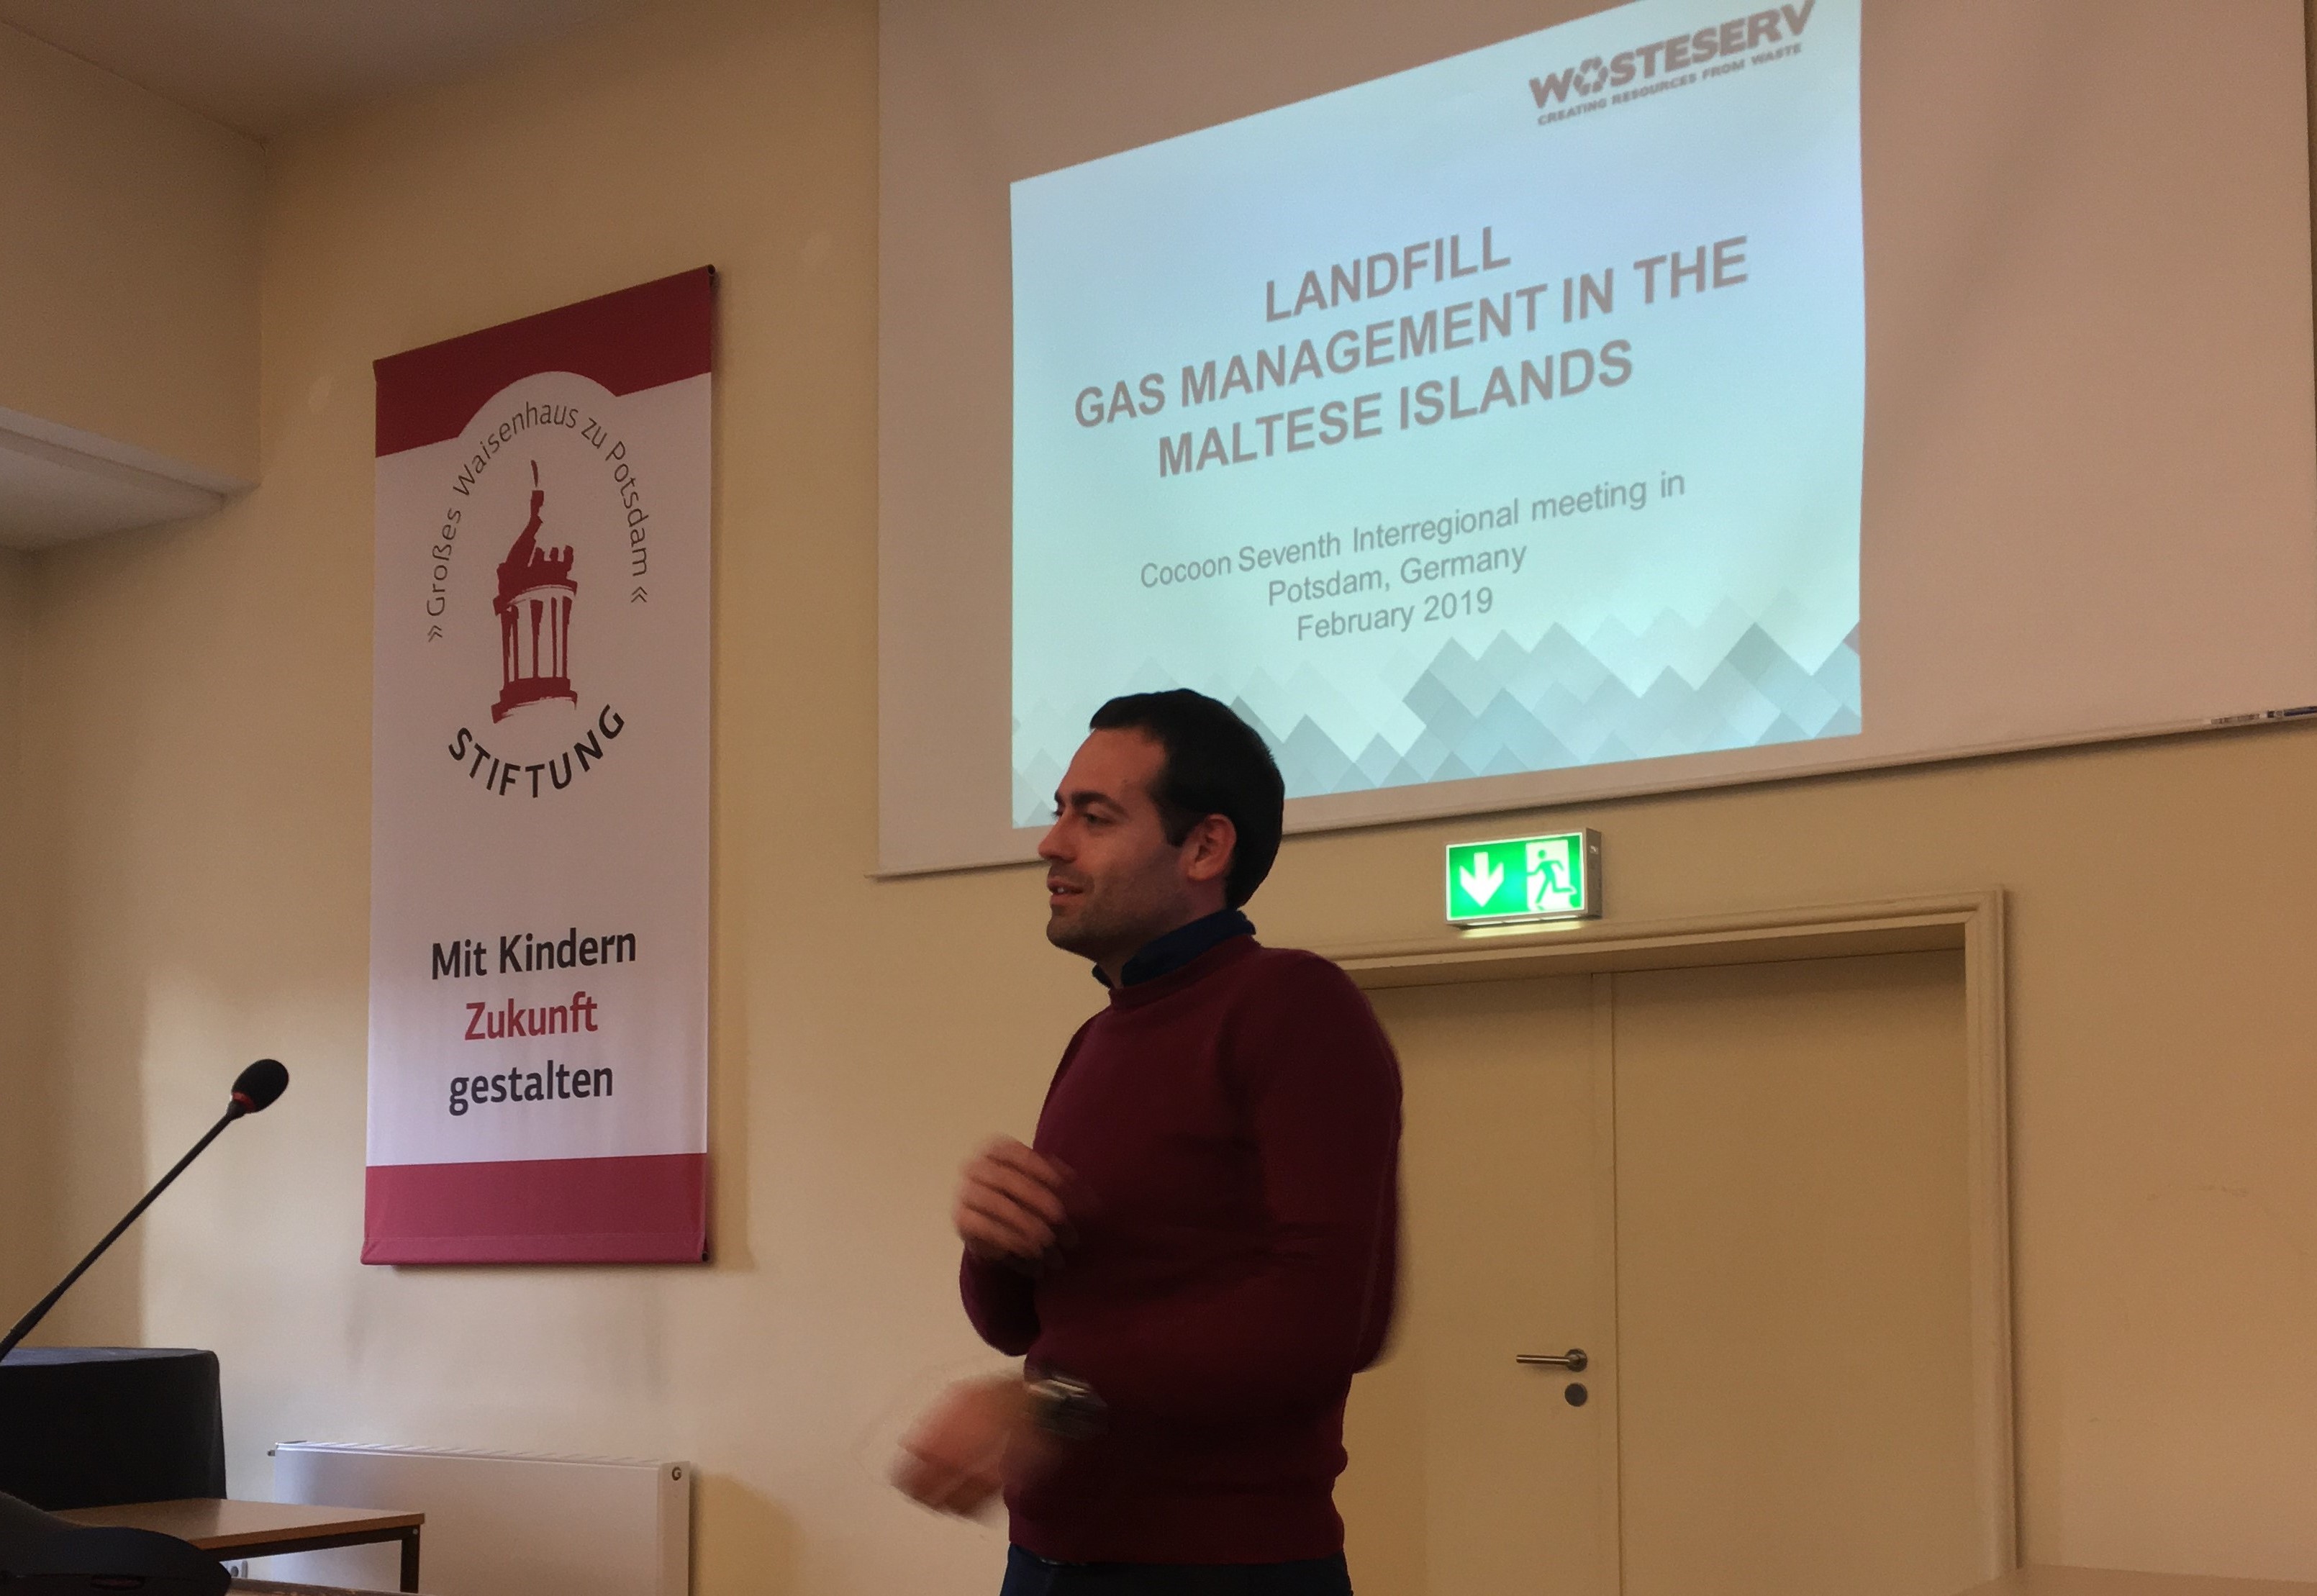 Landfill gas management in the Maltese islands